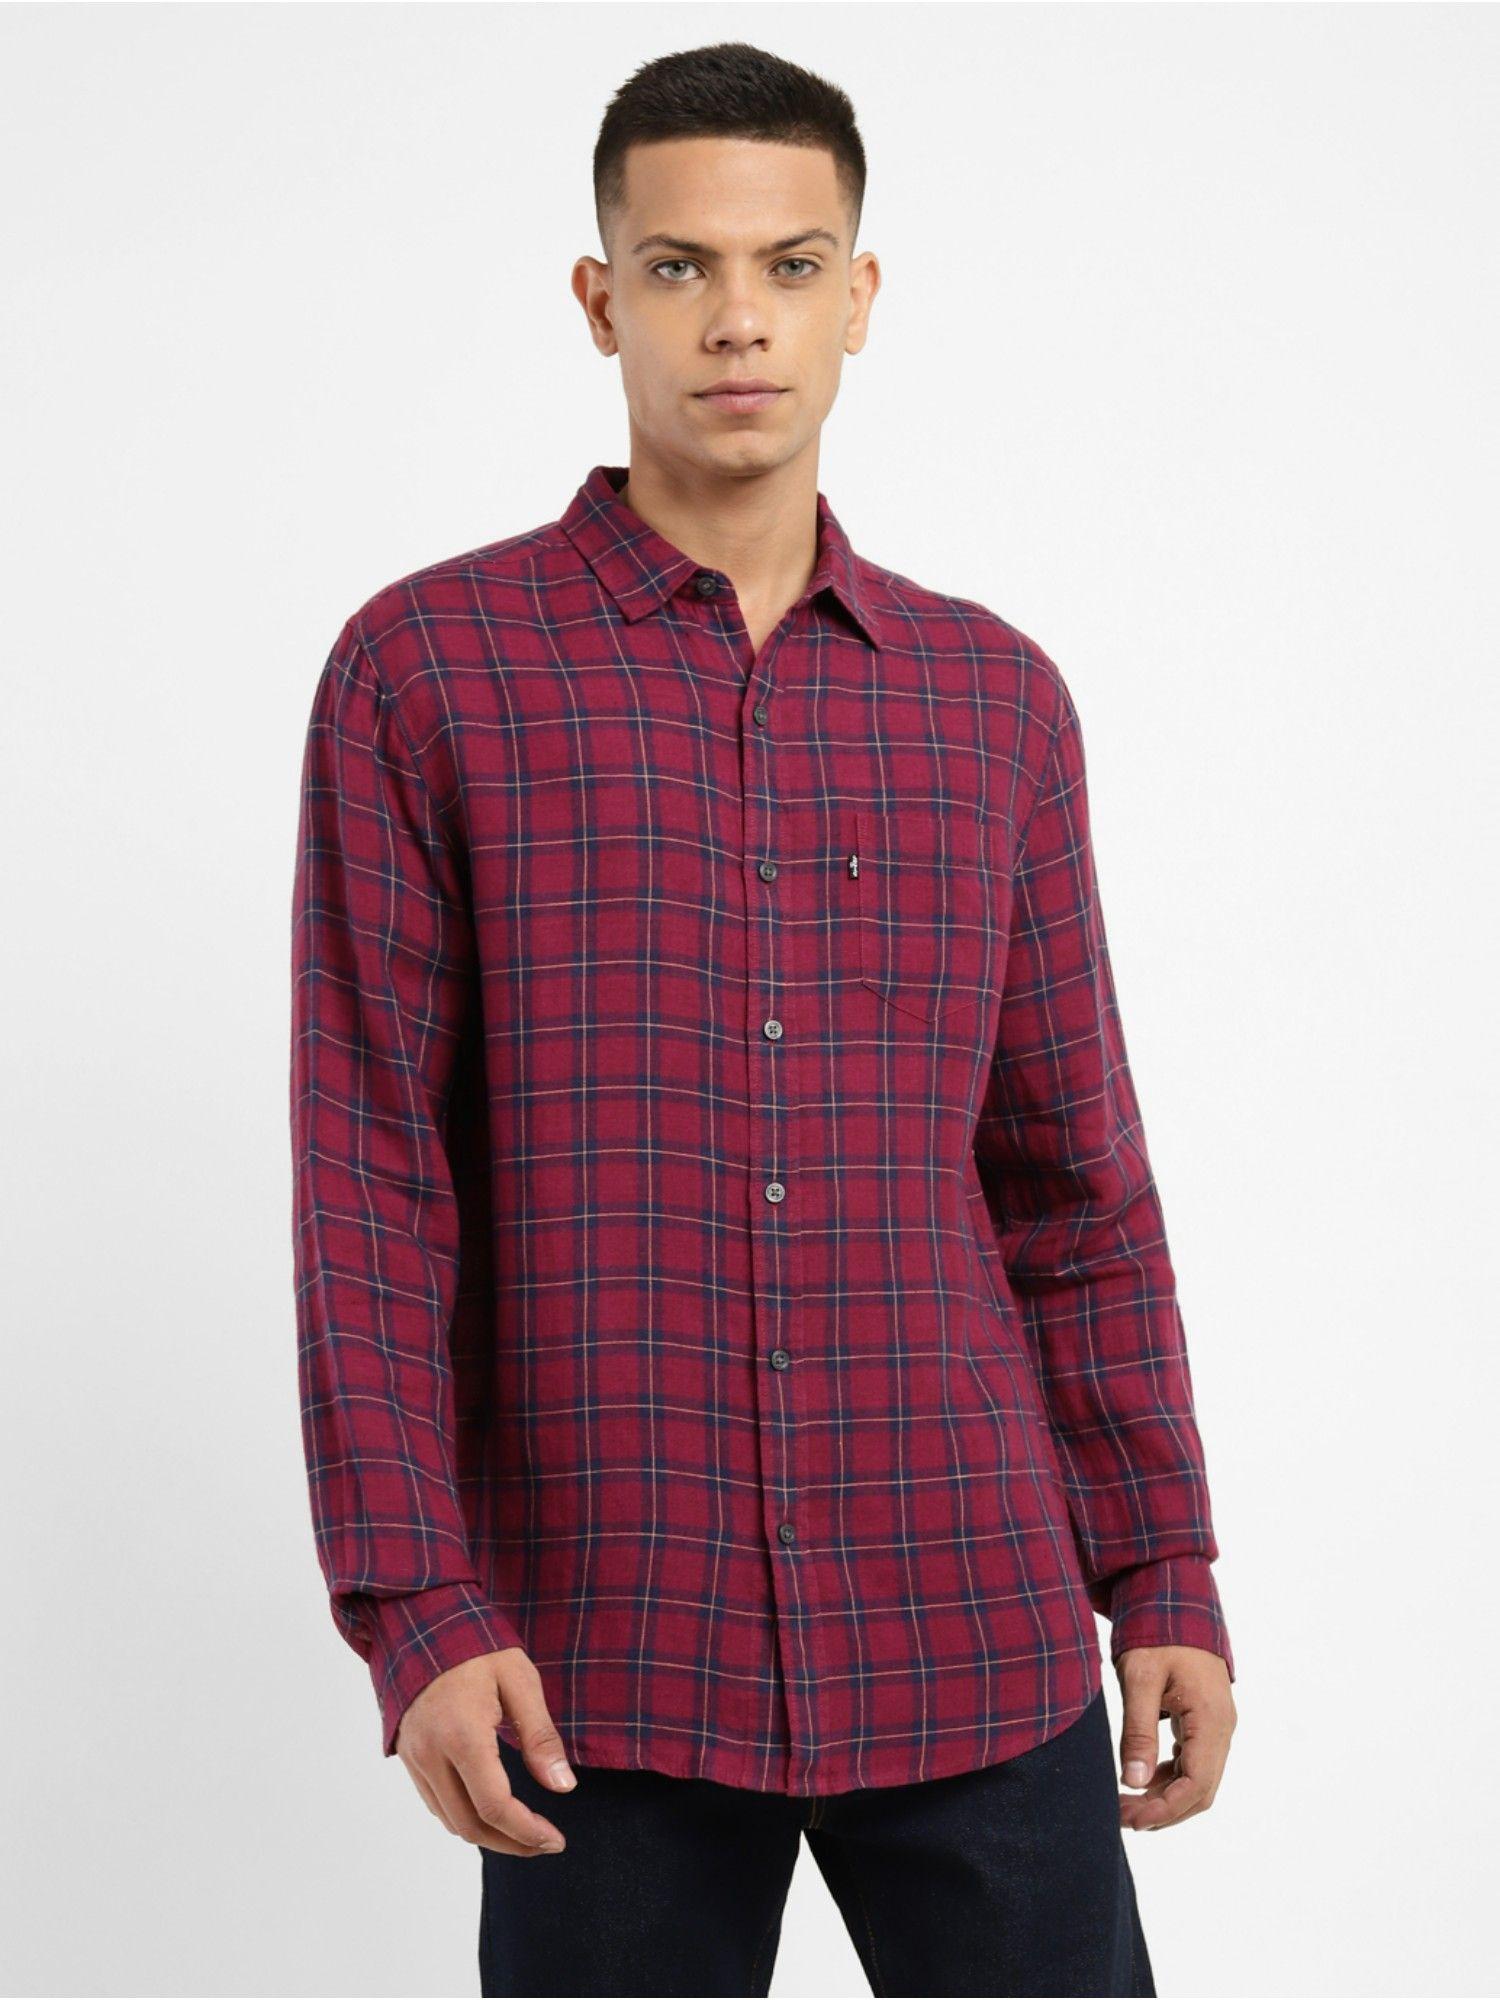 mens-checkered-red-slim-fit-shirt